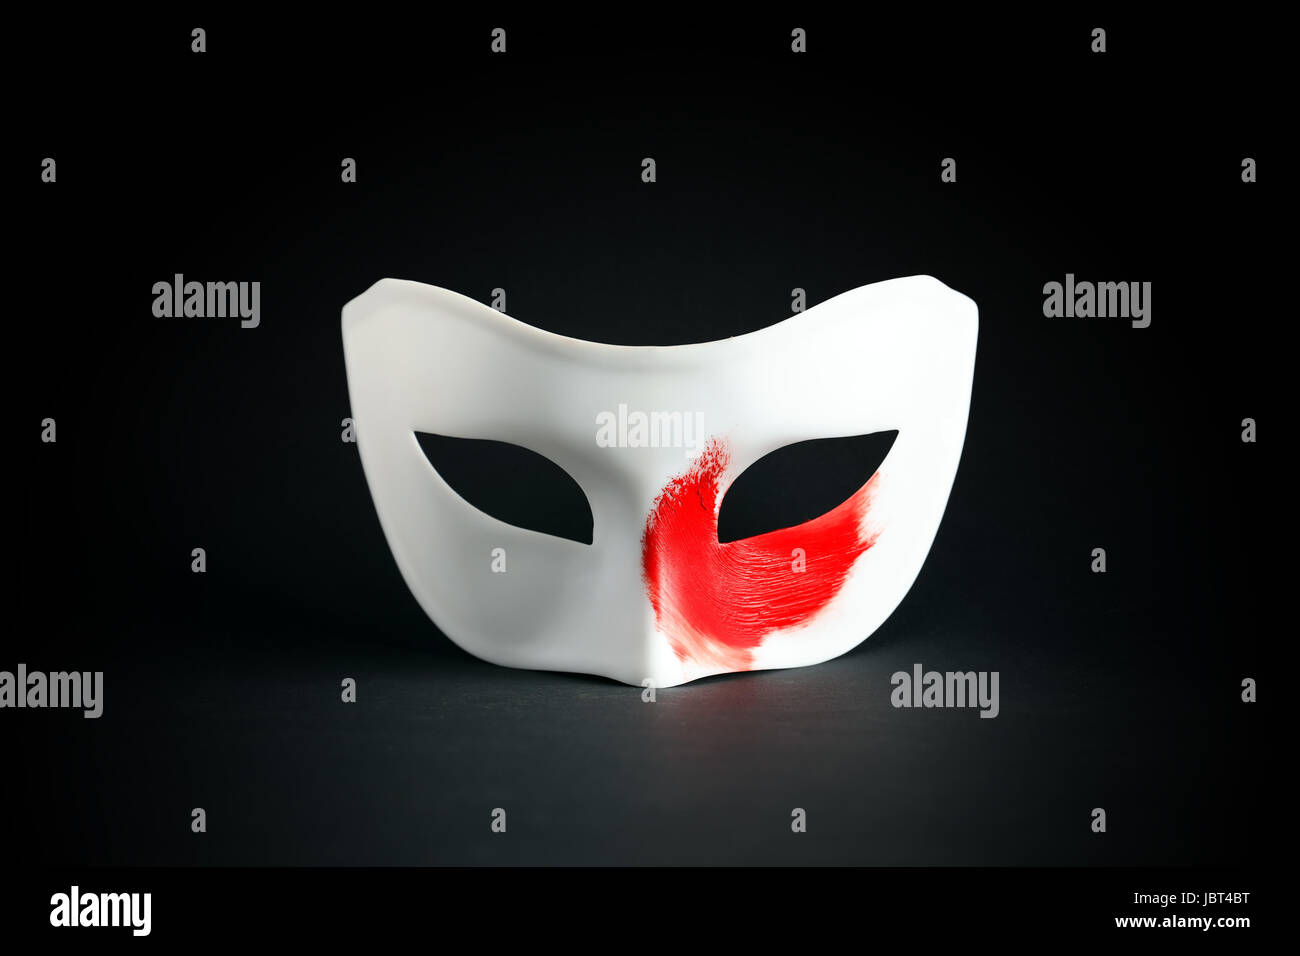 Art concept. White mask with red spot of paint on black background Stock Photo